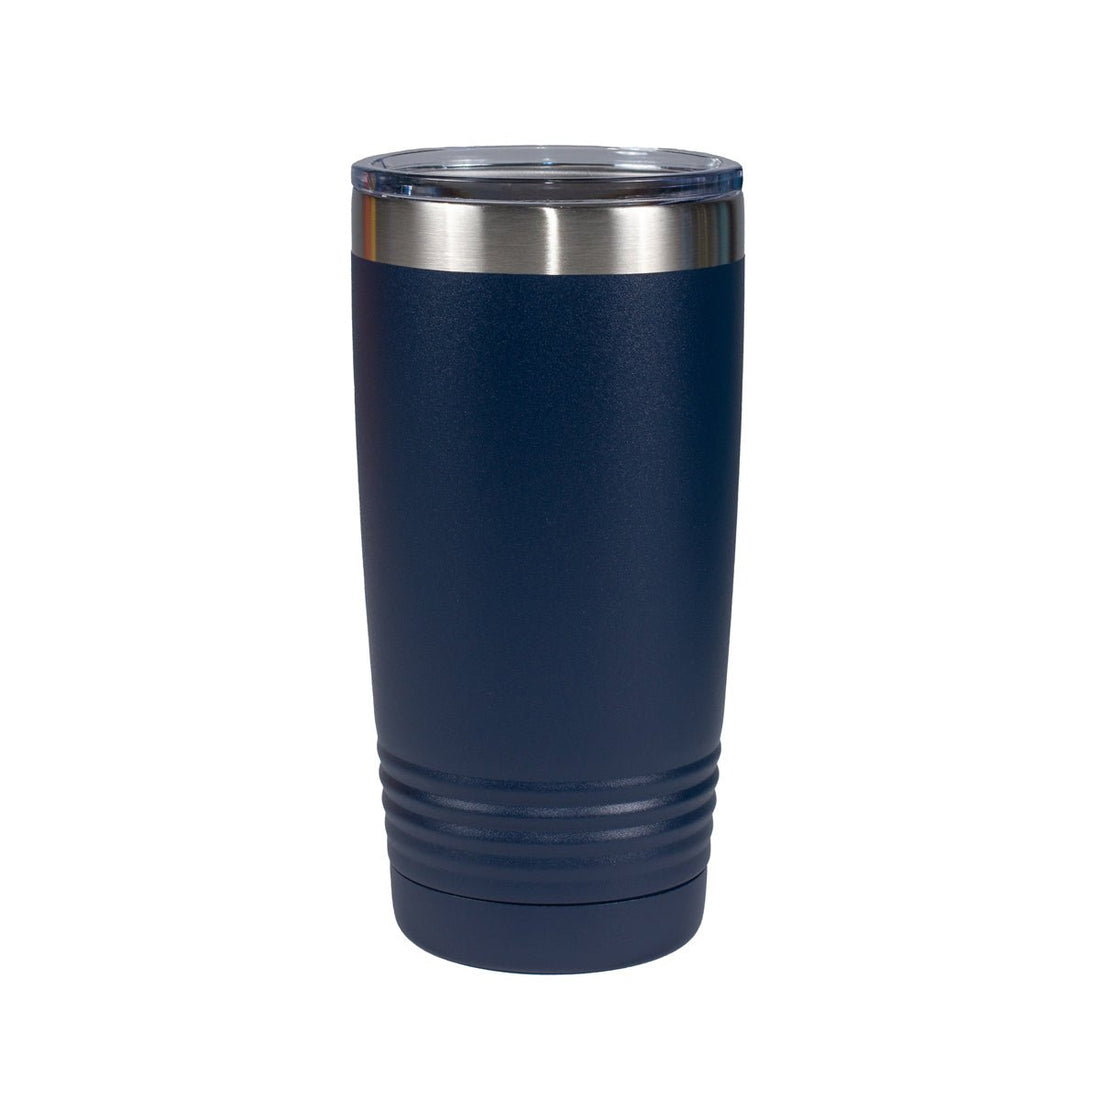 UV Printed - CLARKSVILLE PANTHERS SPORTS - 20 oz. Beverage Tumbler - 17 Colors and 5 Sports - ATOM Promotions